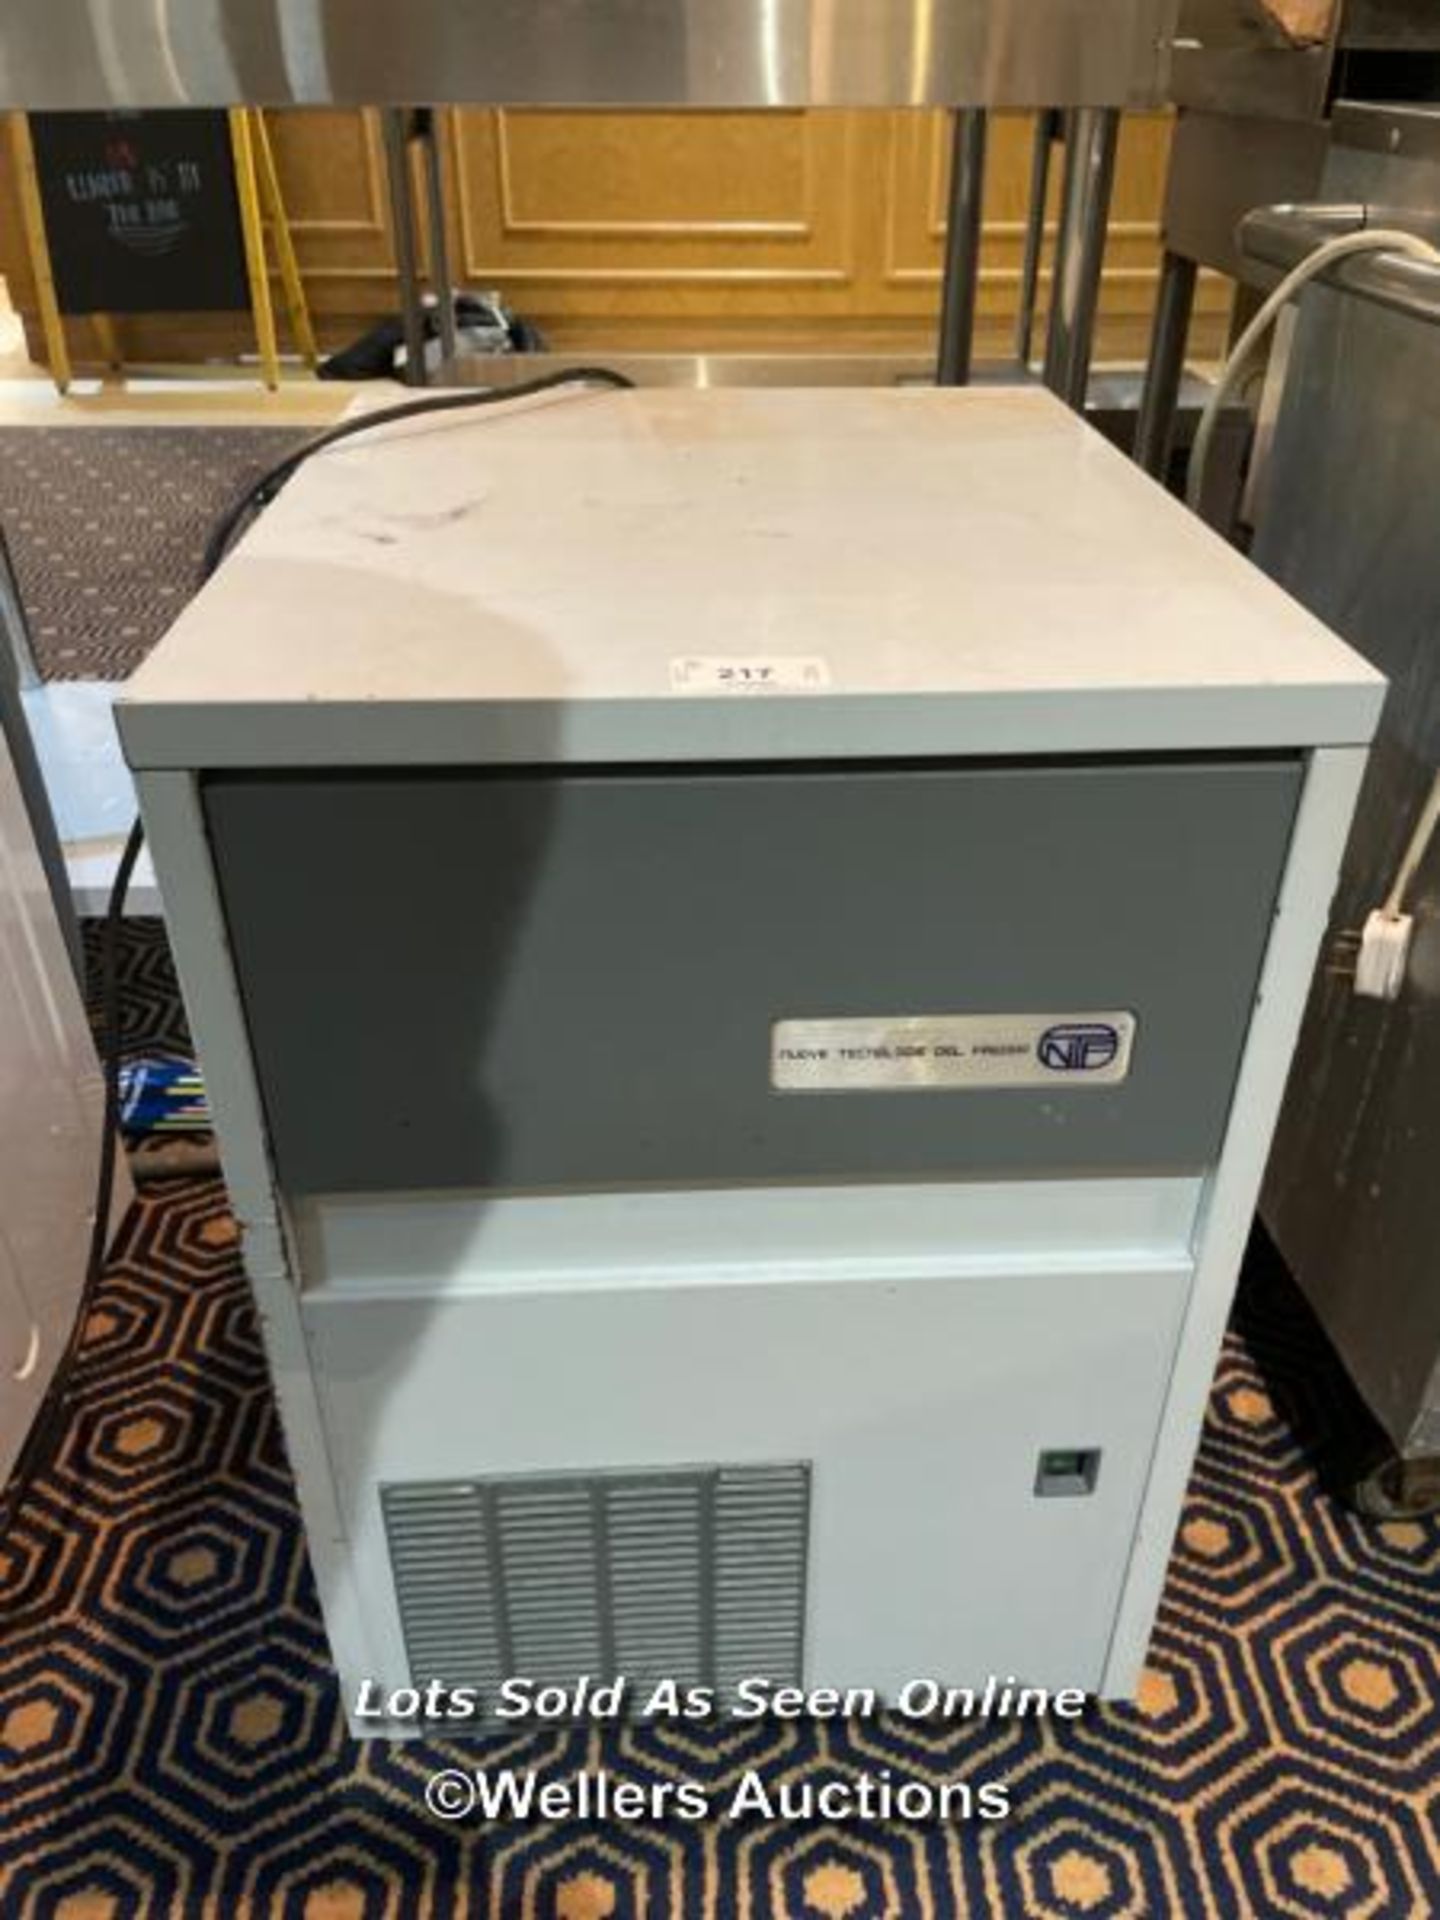 NTF SL70 ICE MAKER, 220-240V, 69CM (H) X 49.5CM (W) X 59CM (D) / COLLECTION LOCATION: OLD WOKING